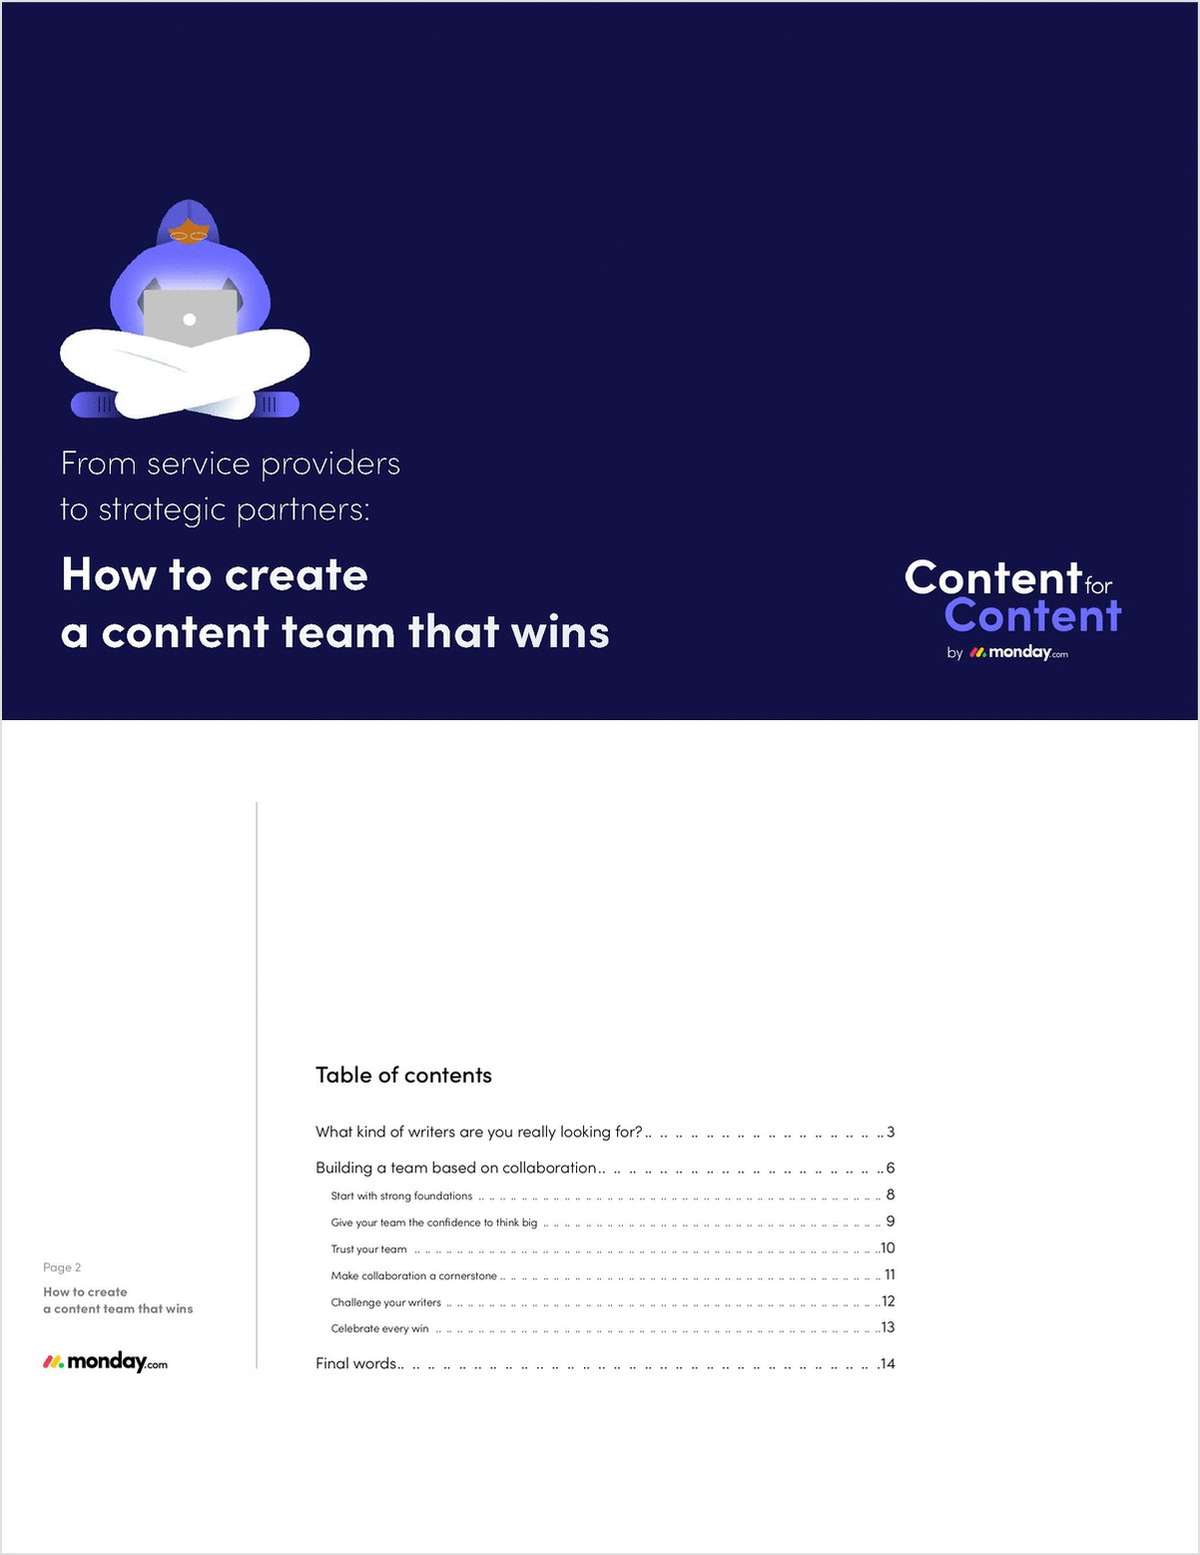 How to Create a Content Team that Wins